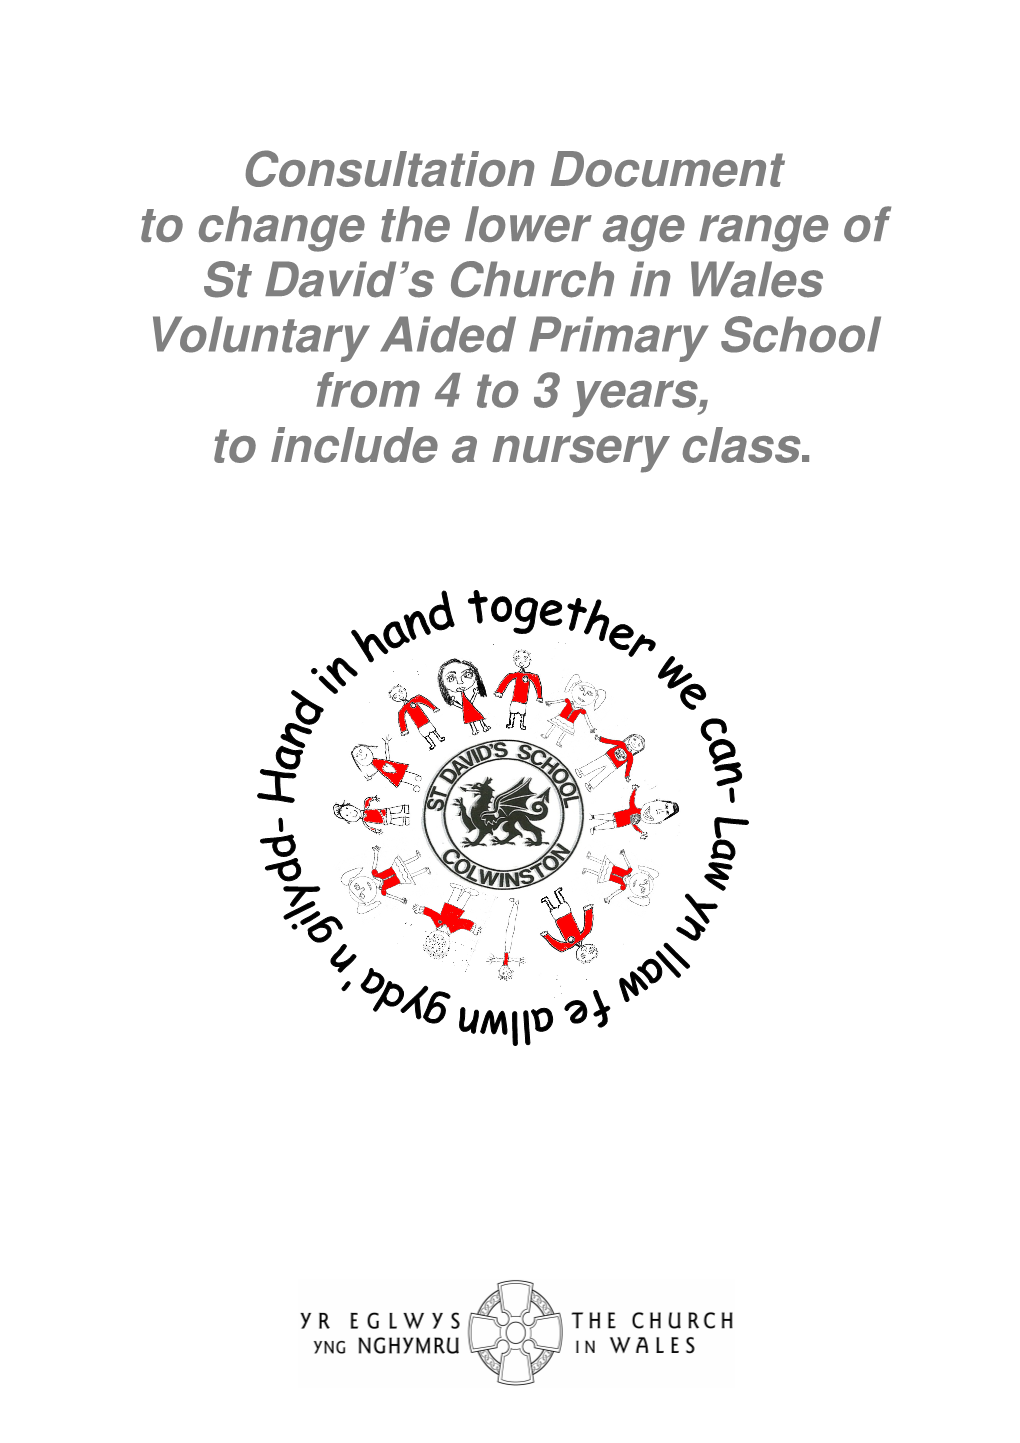 Consultation Document to Change the Lower Age Range of St David's